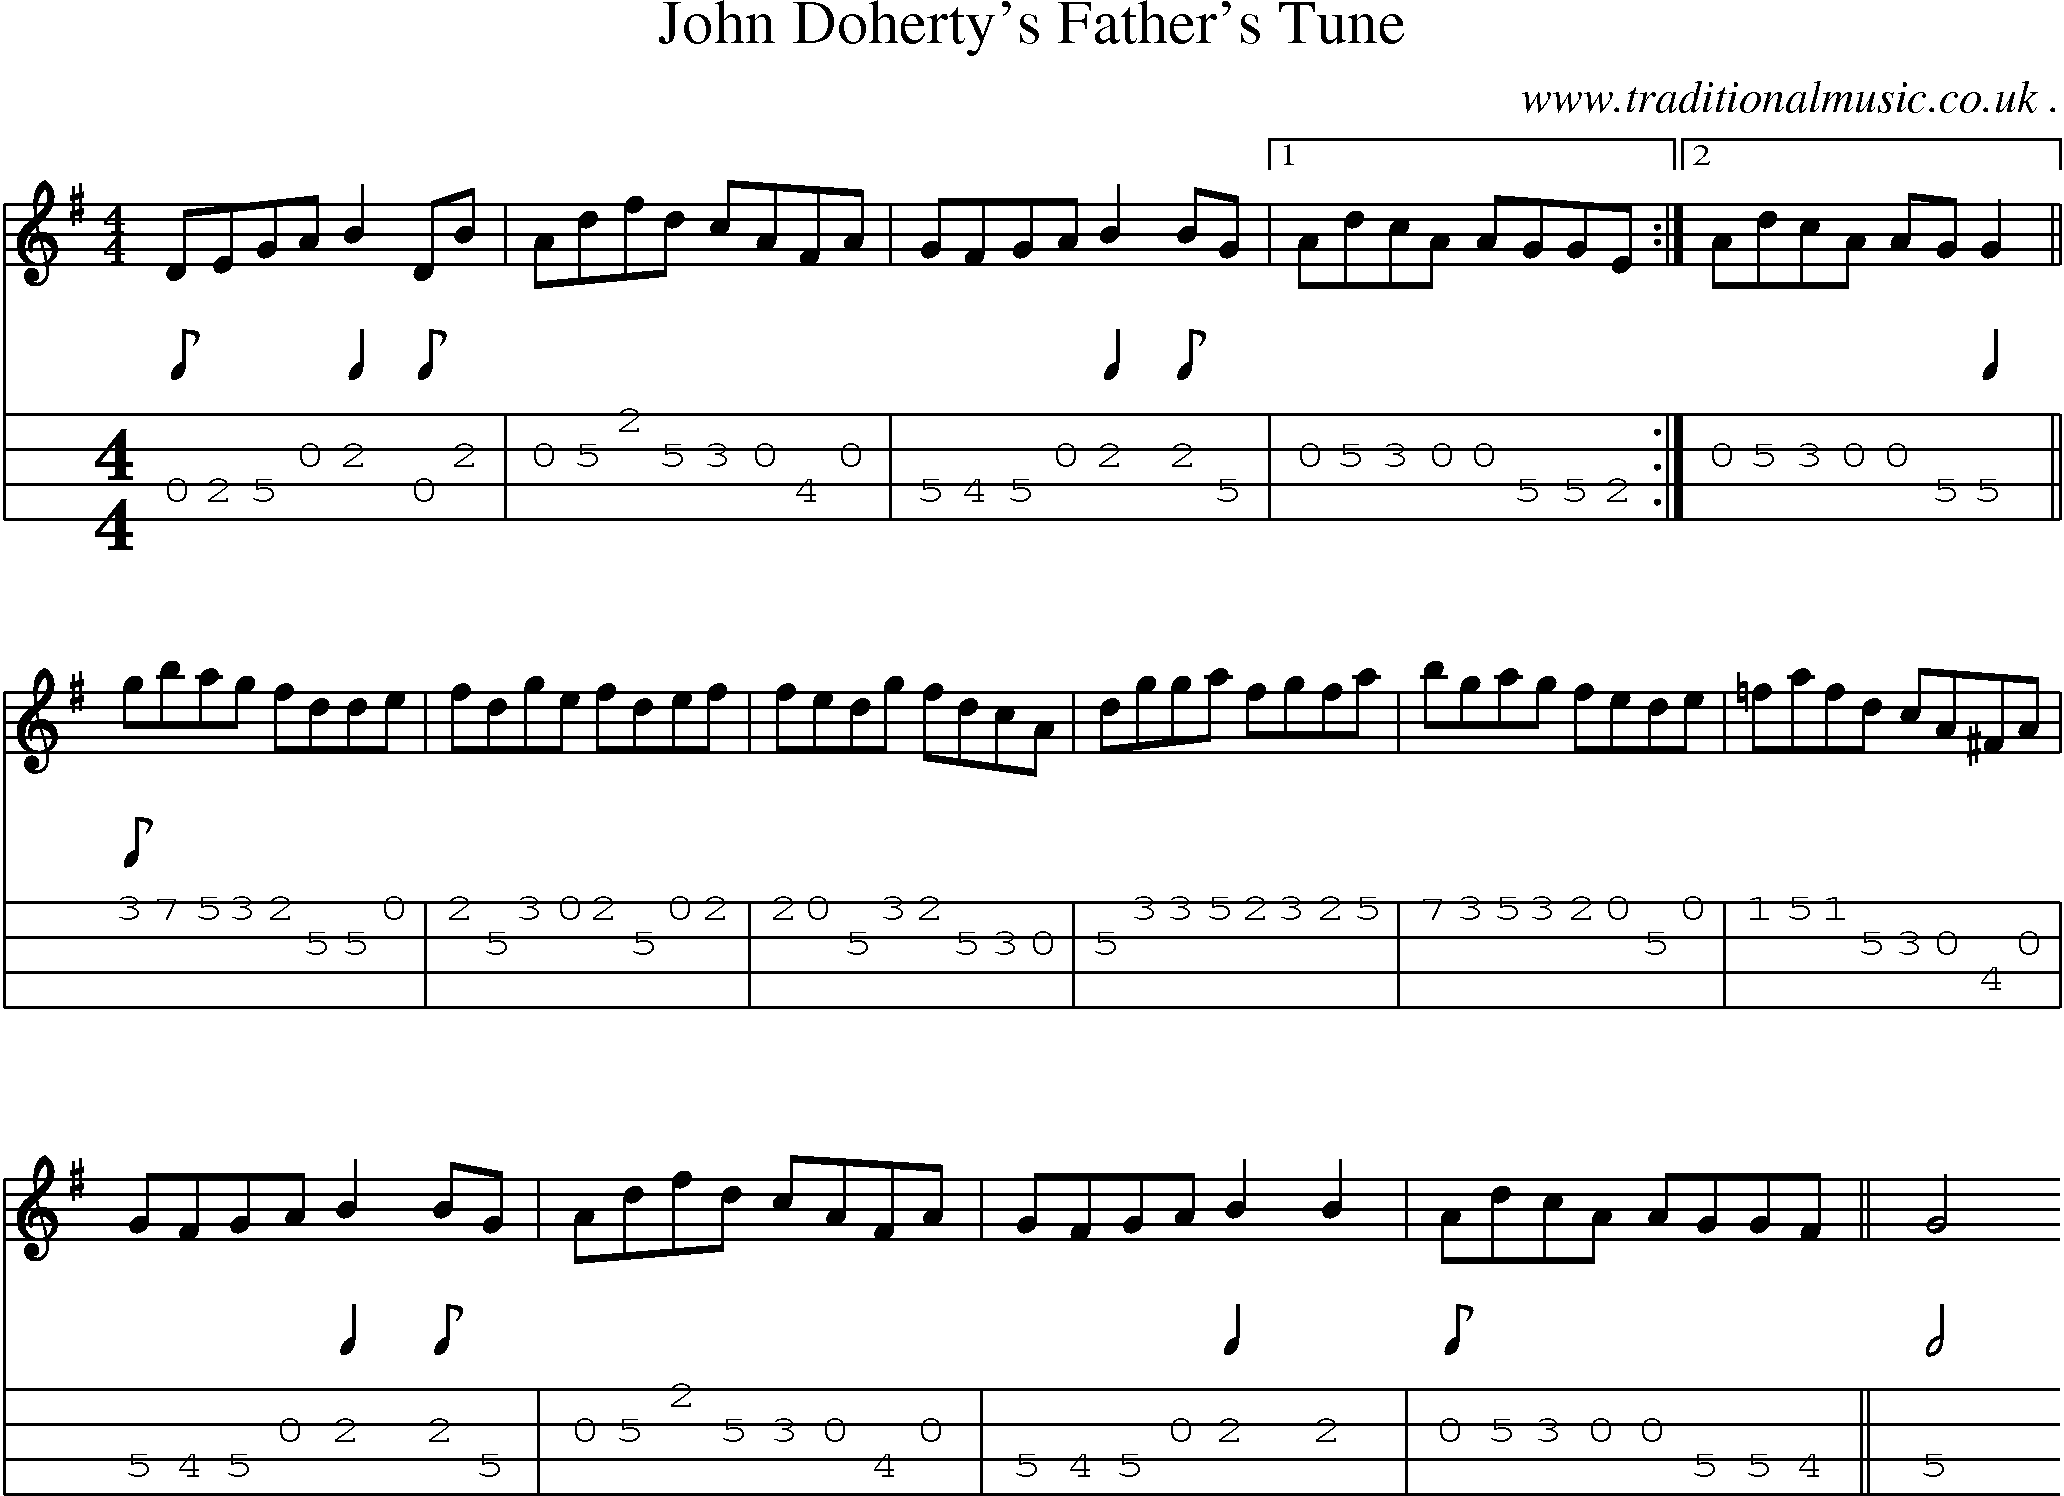 Sheet-Music and Mandolin Tabs for John Dohertys Fathers Tune